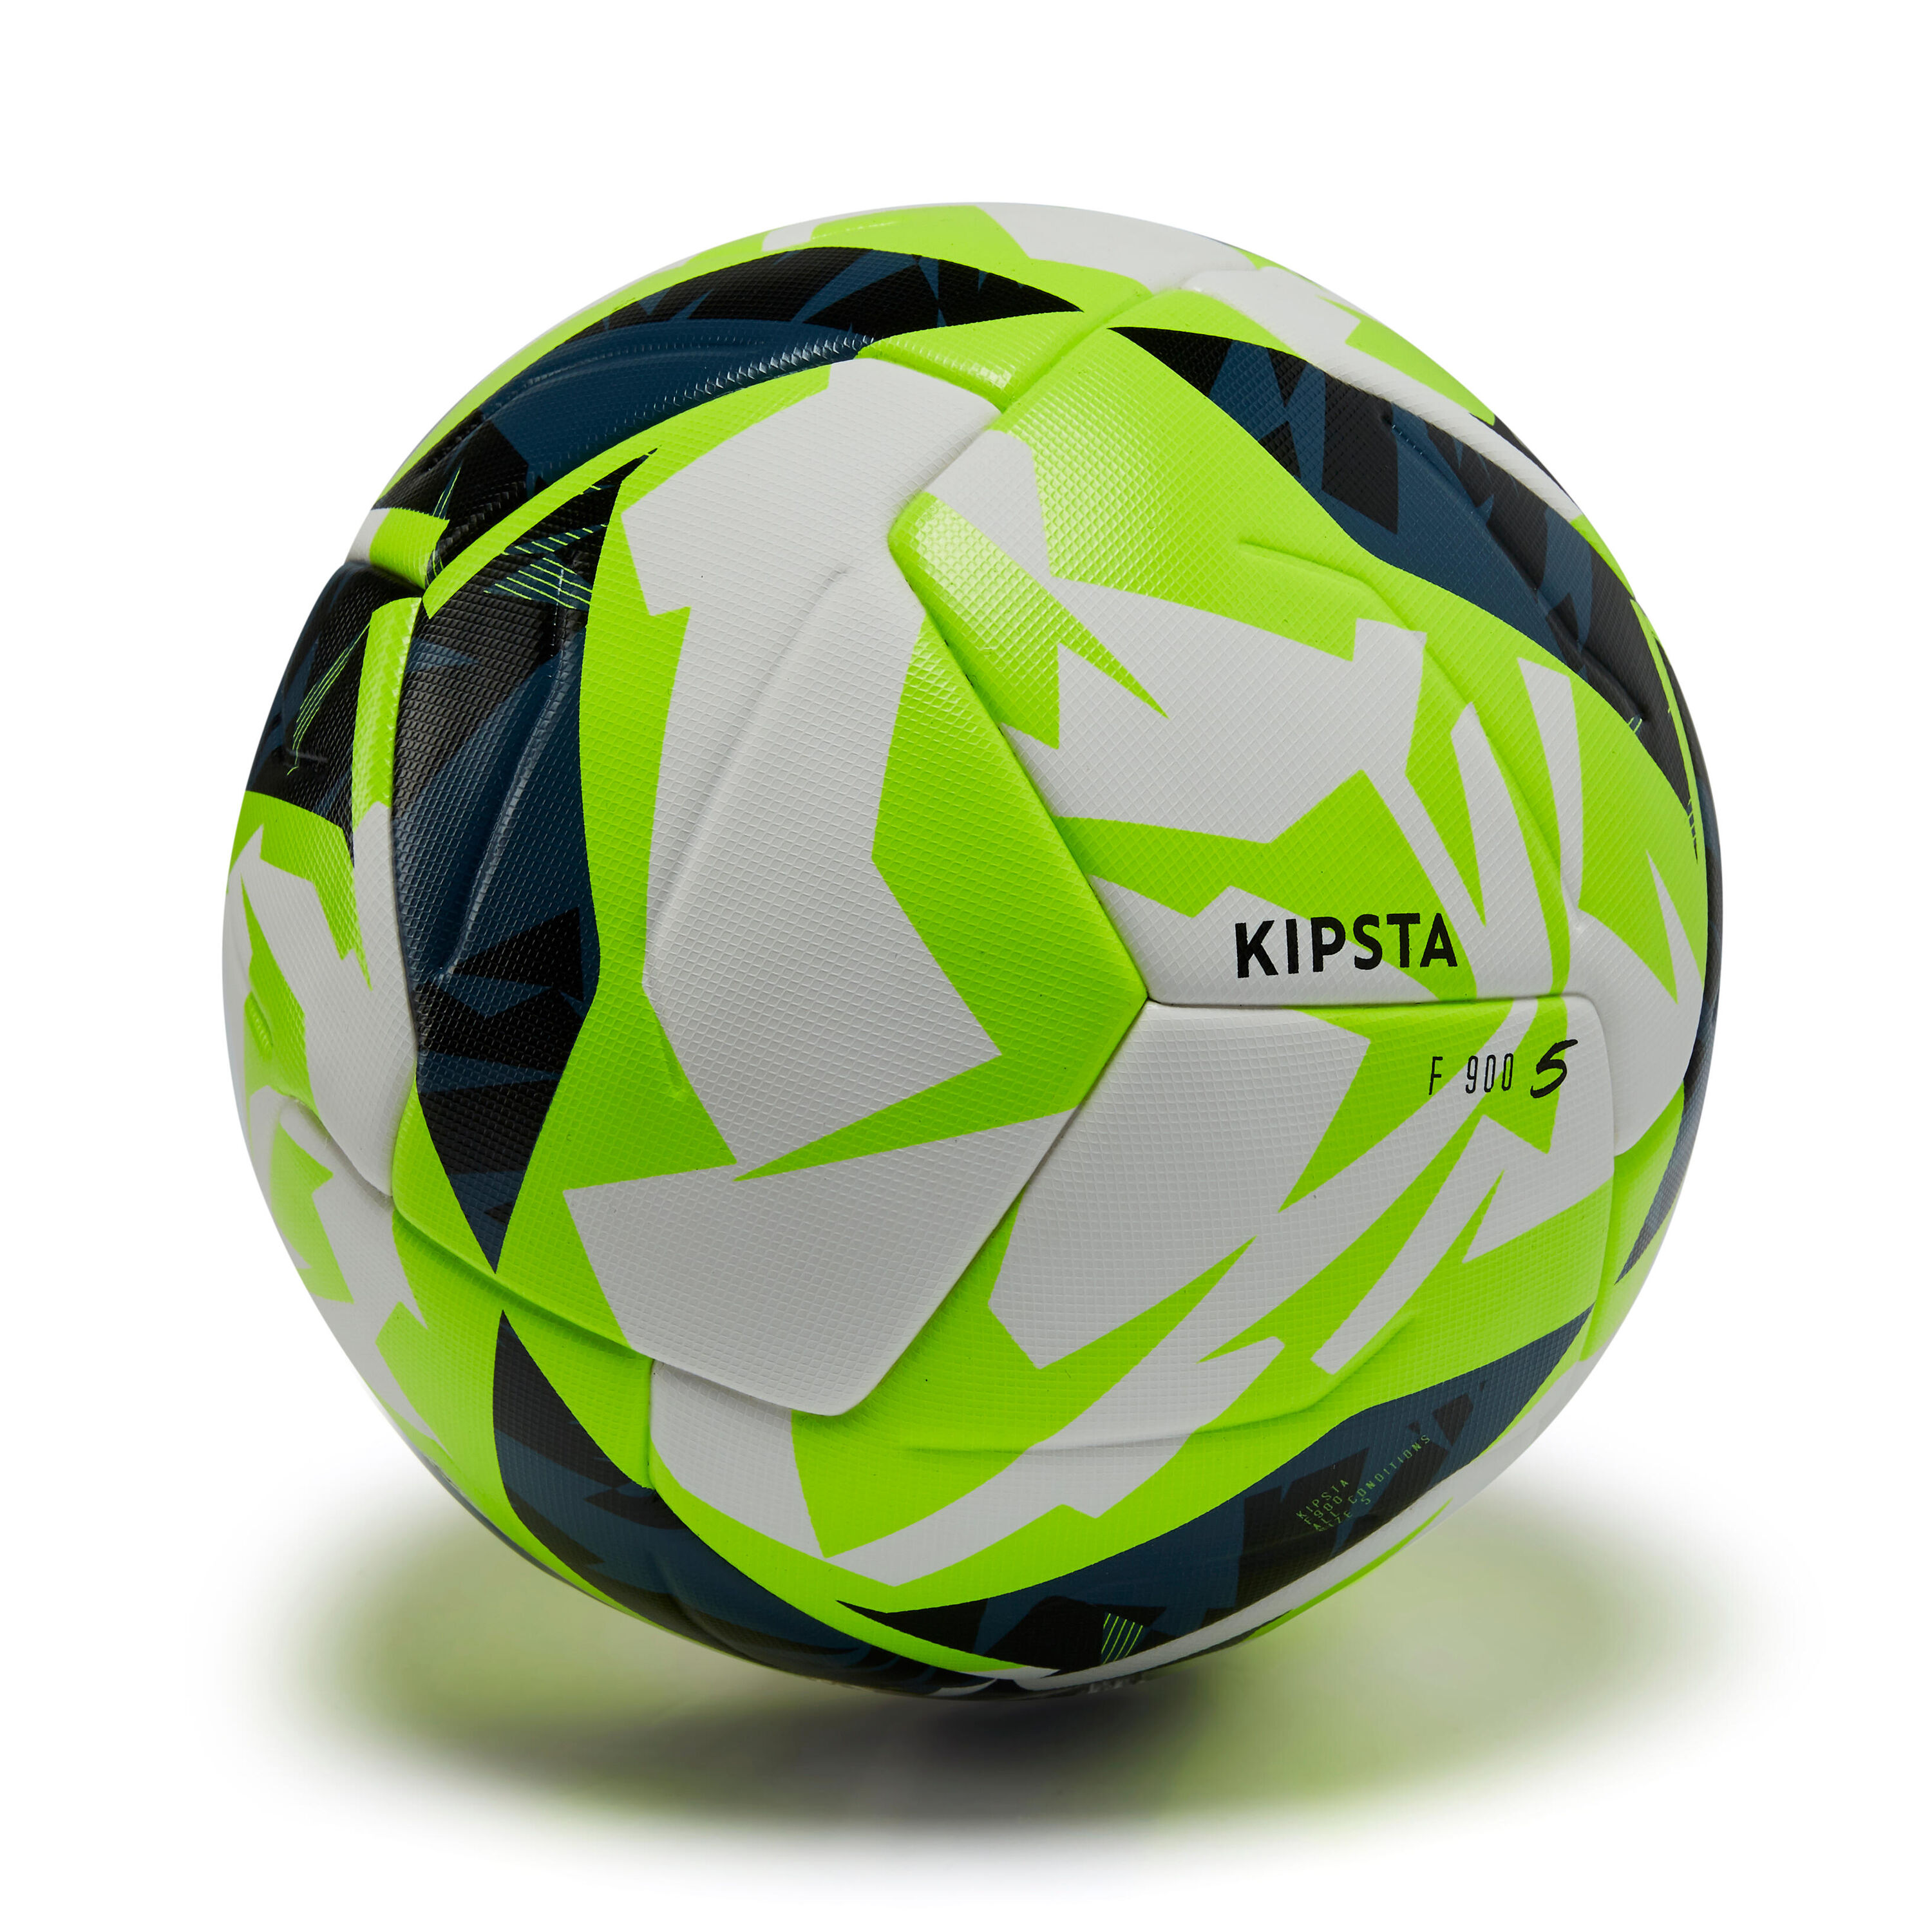 KIPSTA Thermobonded Size 5 Football FIFA Quality Pro F900 - White/Yellow